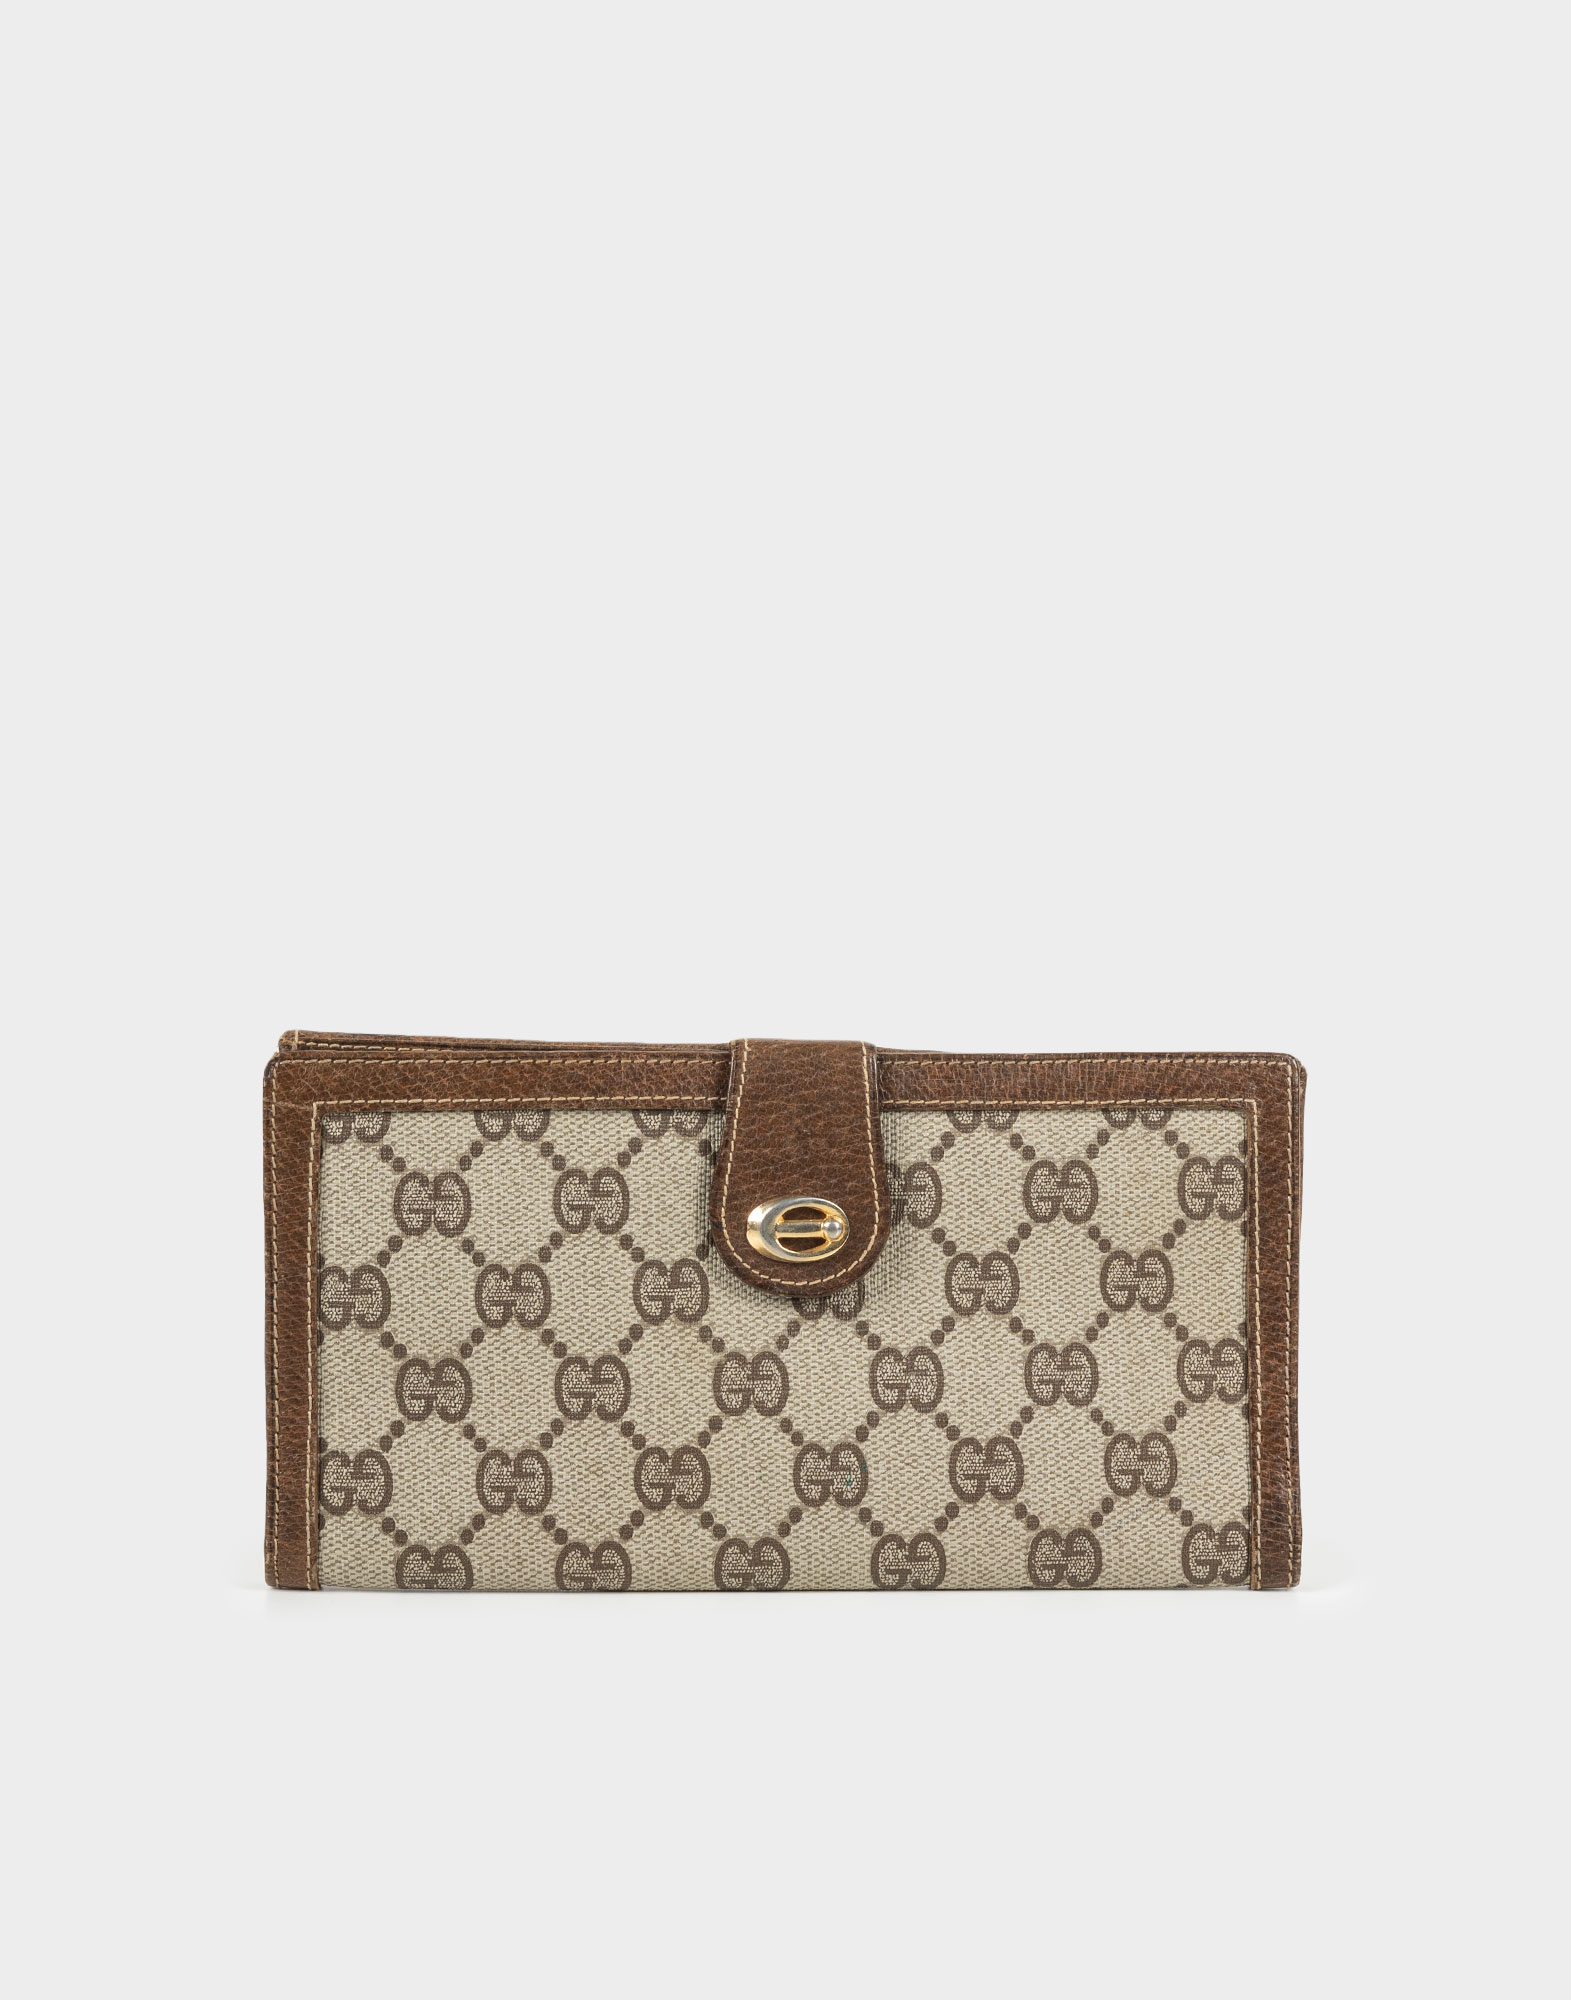 gucci women's card case in beige monogrammed fabric and brown leather details